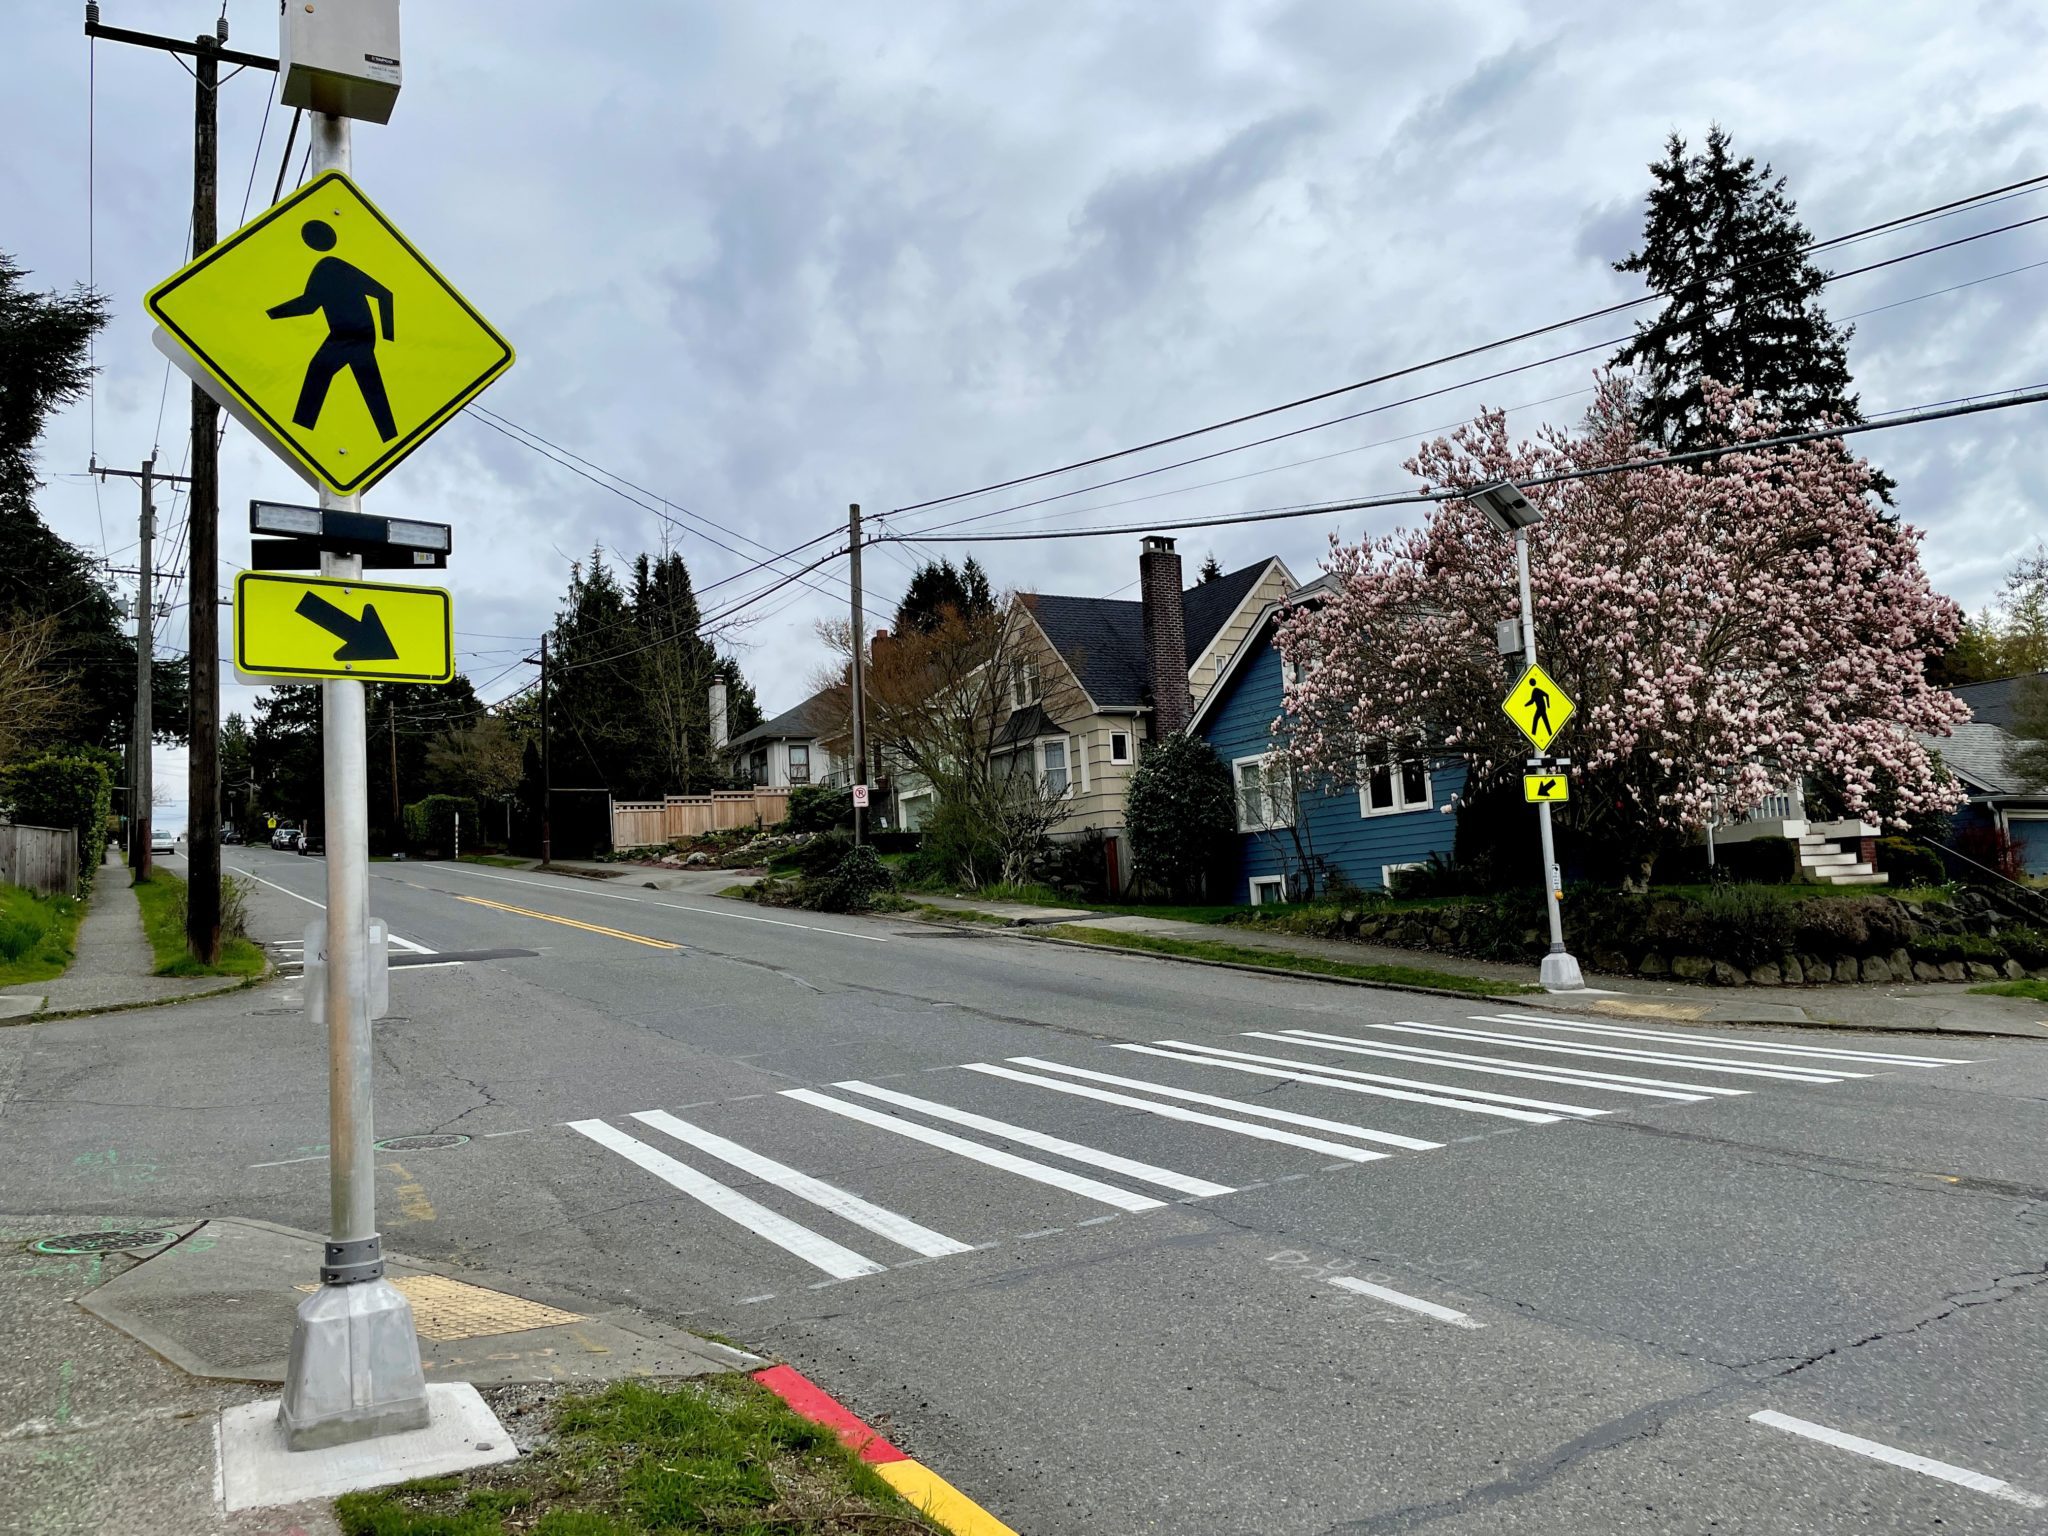 An image of a Rectangular Rapid Flashing Beacon. Flashing beacons are present on either side of the crosswalk that can be triggered by a pedestrian prior to crossing to raise awareness for drivers that someone is crossing. 